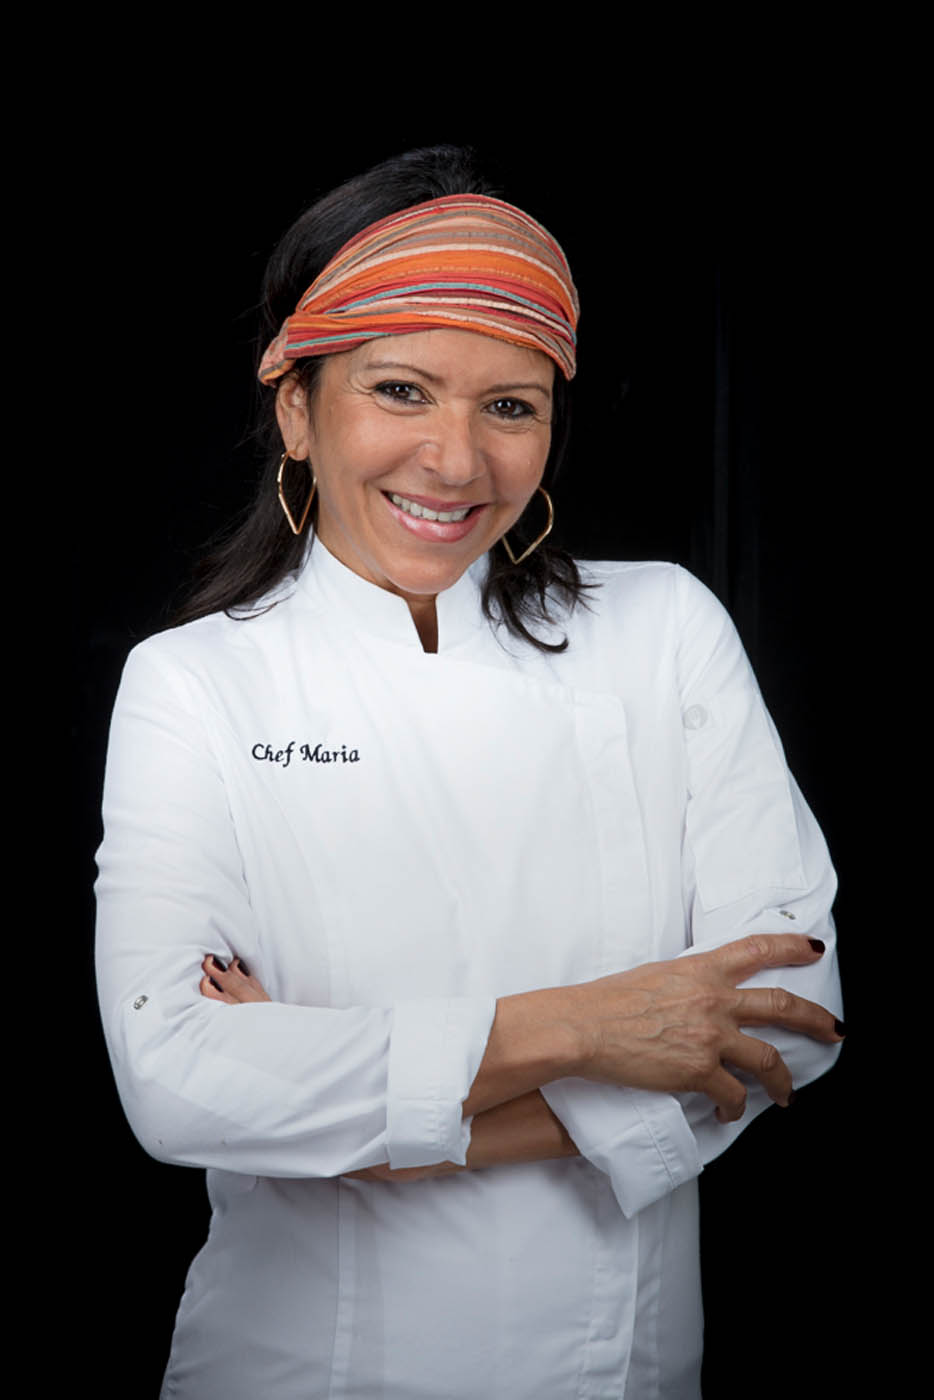 The Real Food Academy Miami Chef Maria.